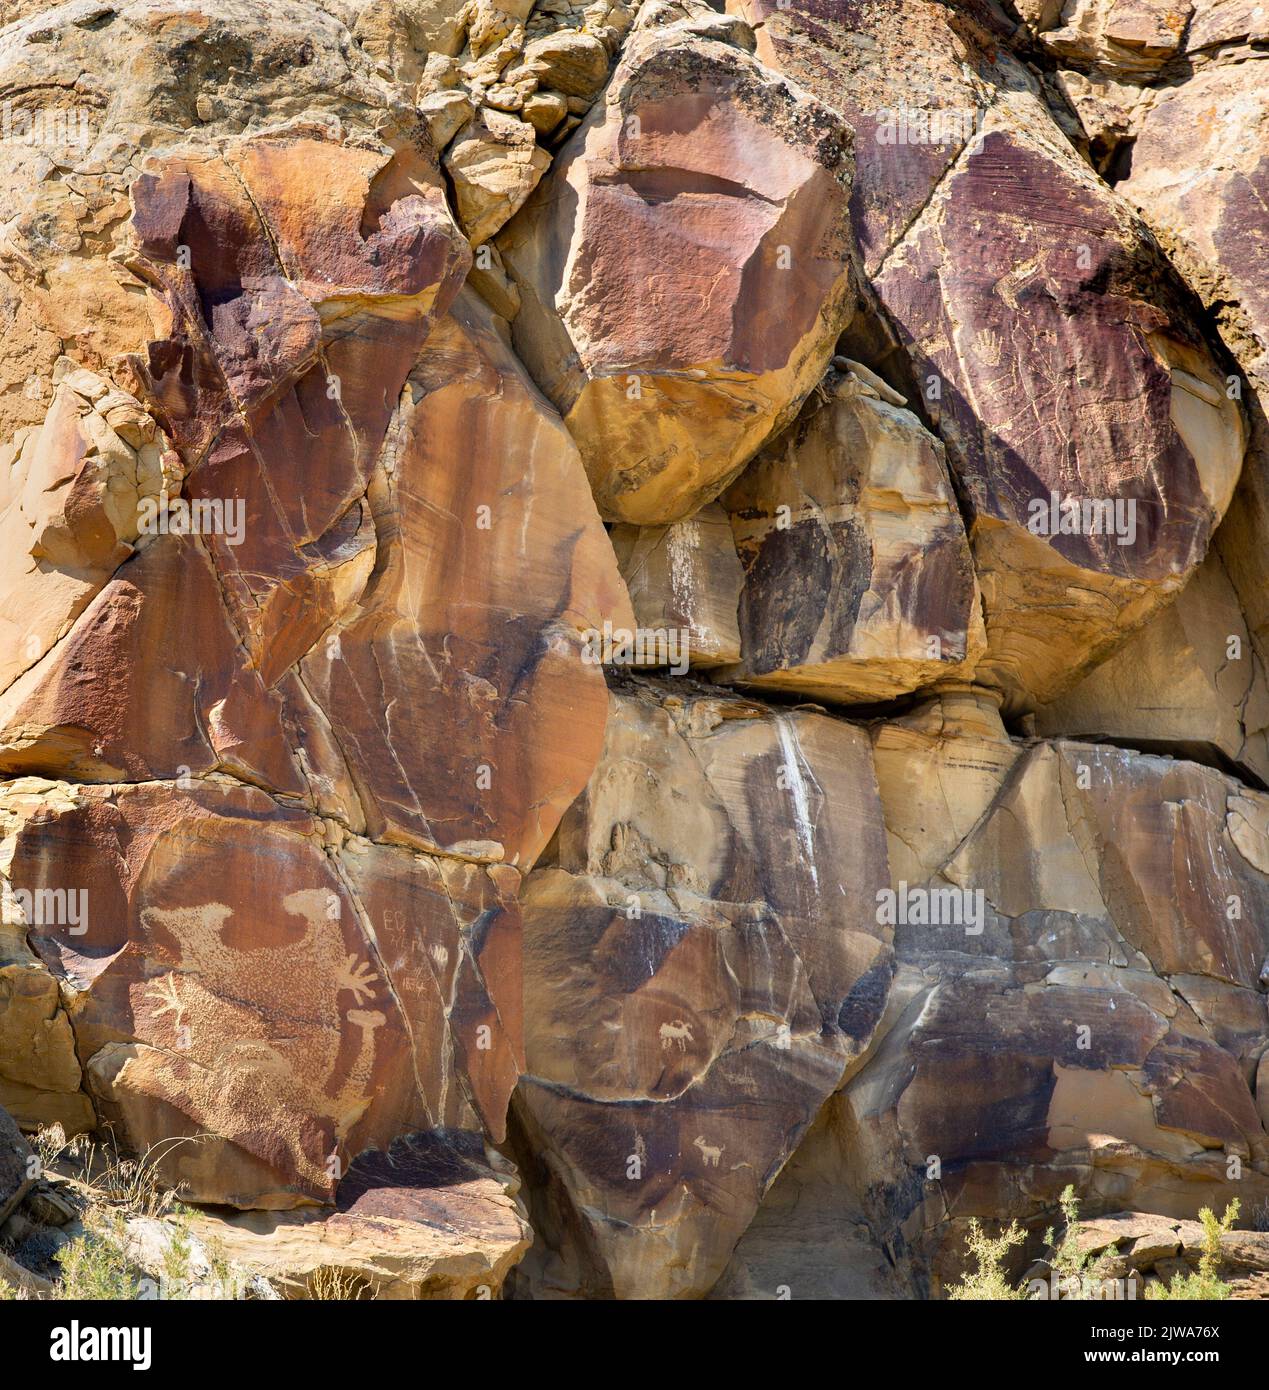 Petroglyphs rock art in Legend Rock State Archaeological Site, Wyoming - Carved sandstone panels with anthropomorphic and zoomorphic animal figures cr Stock Photo